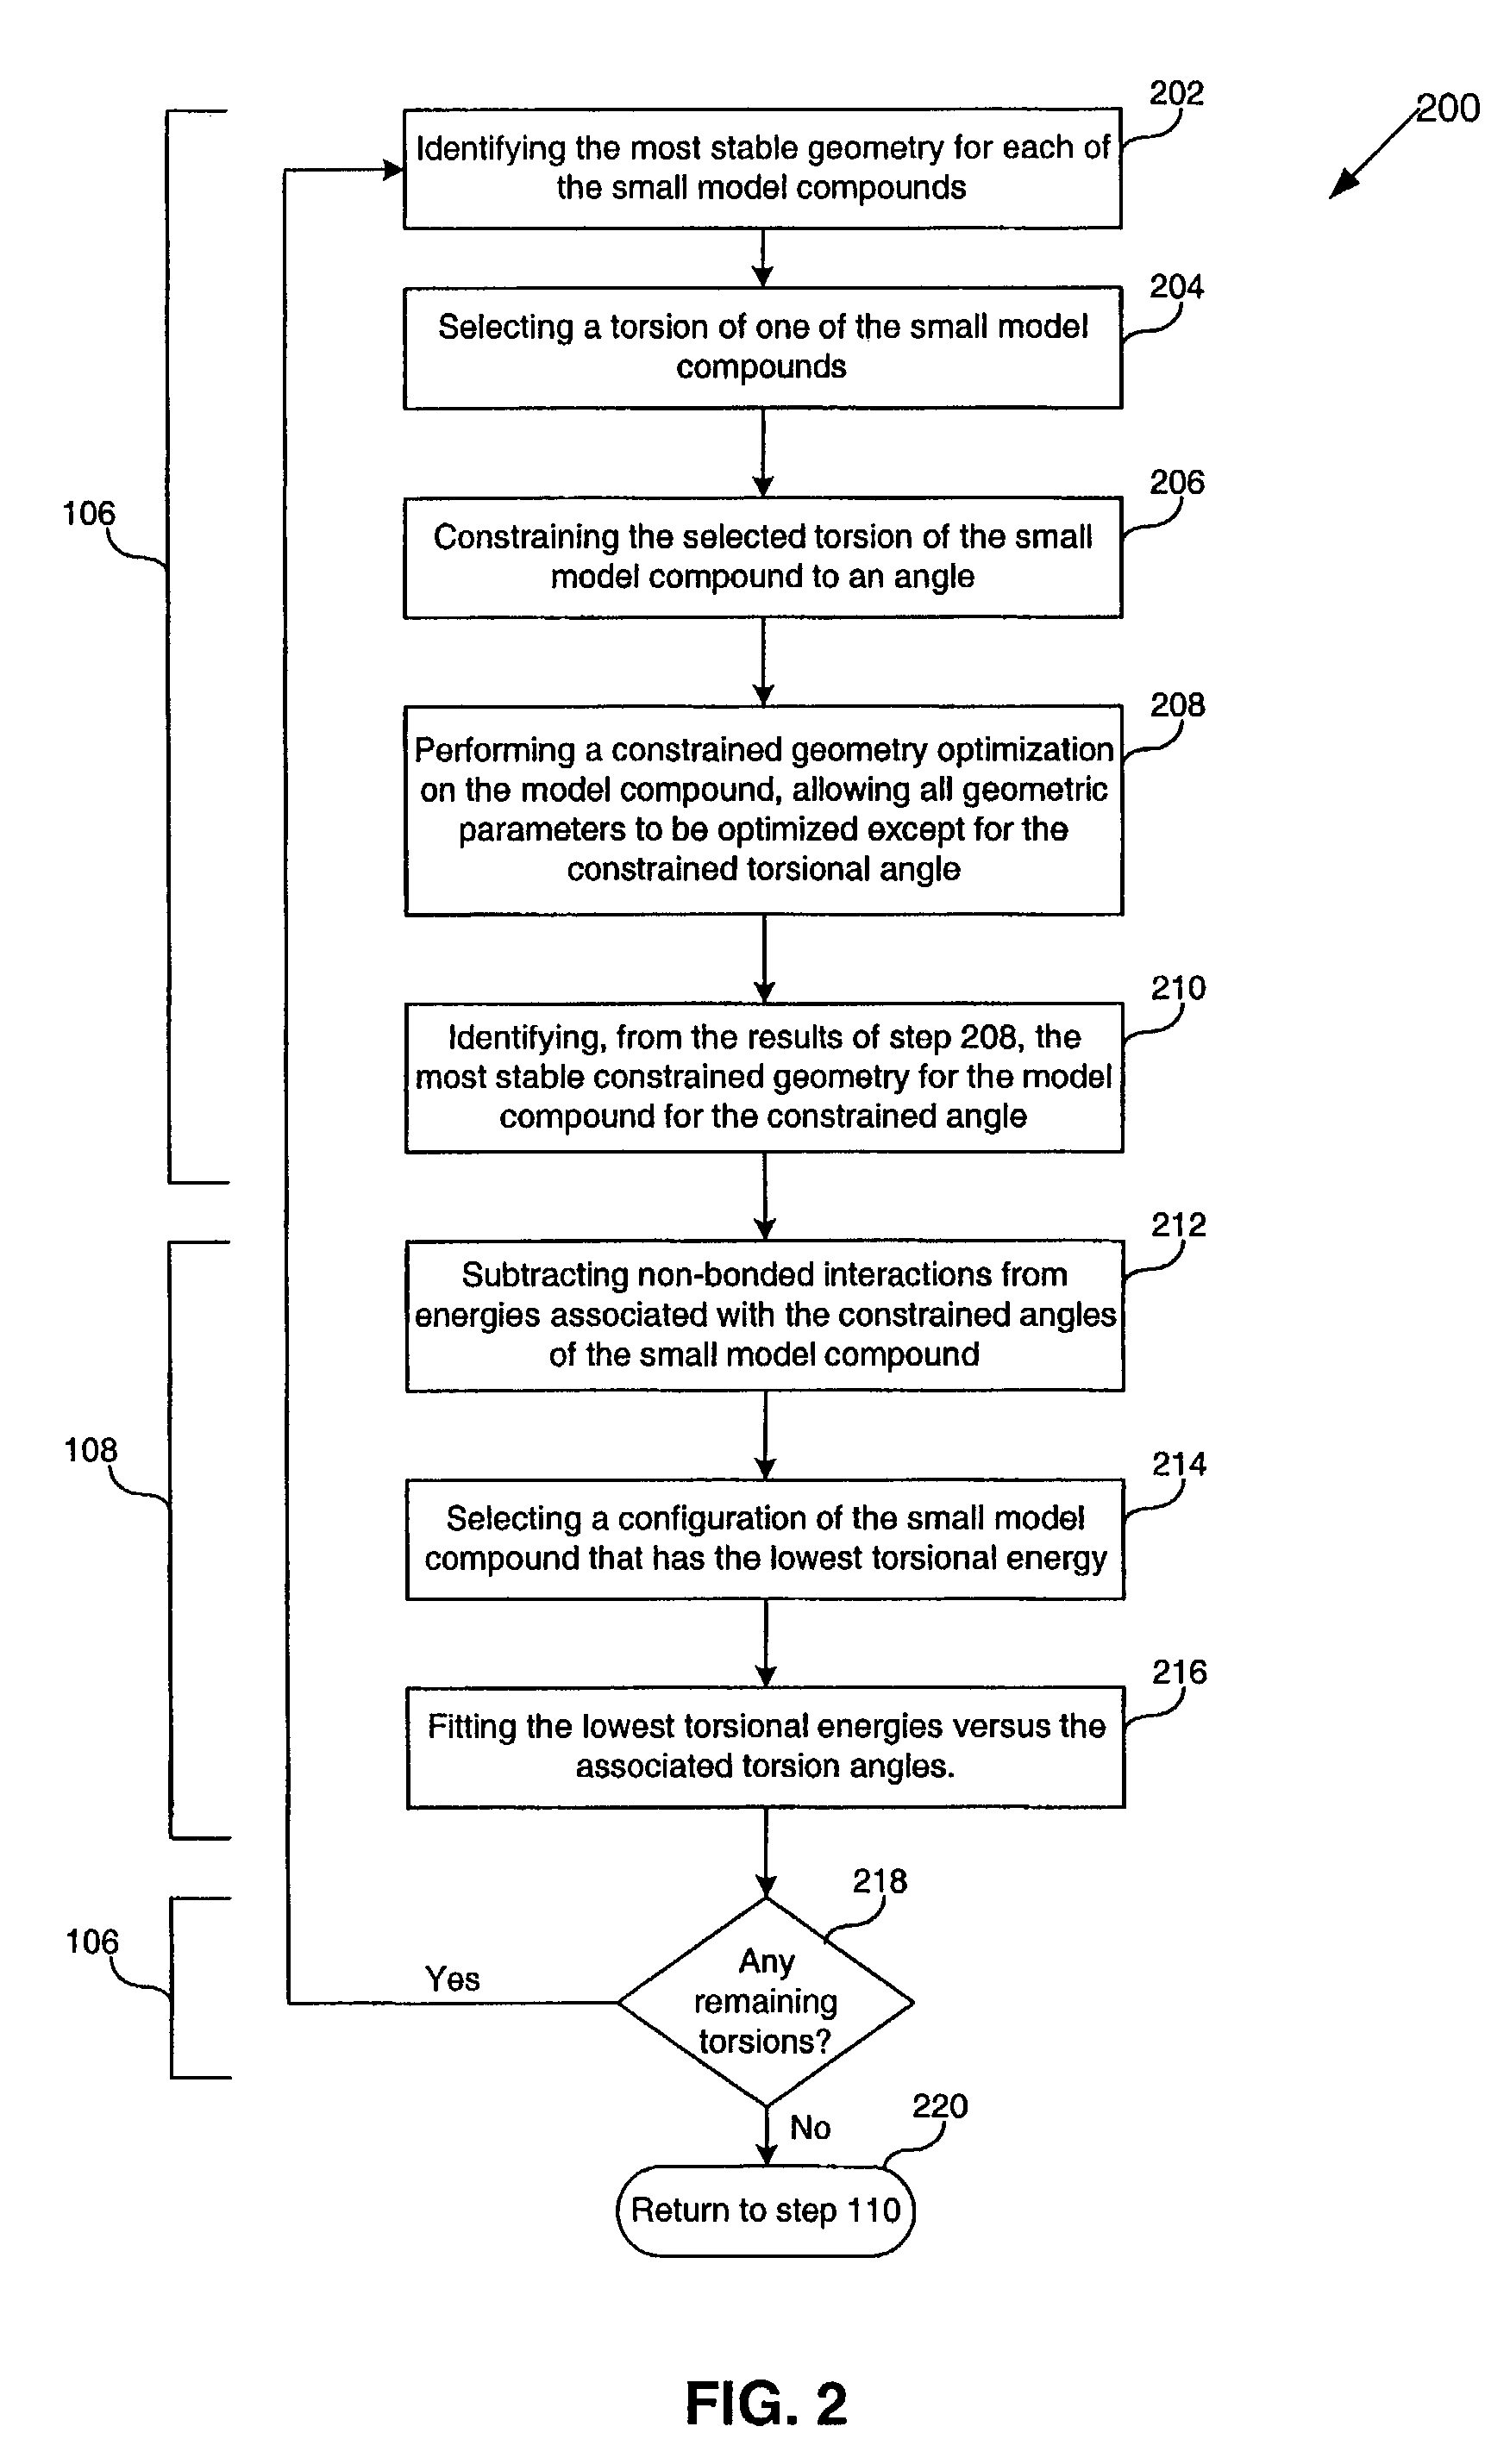 Methods, systems, and computer program products for computational analysis and design of amphiphilic polymers